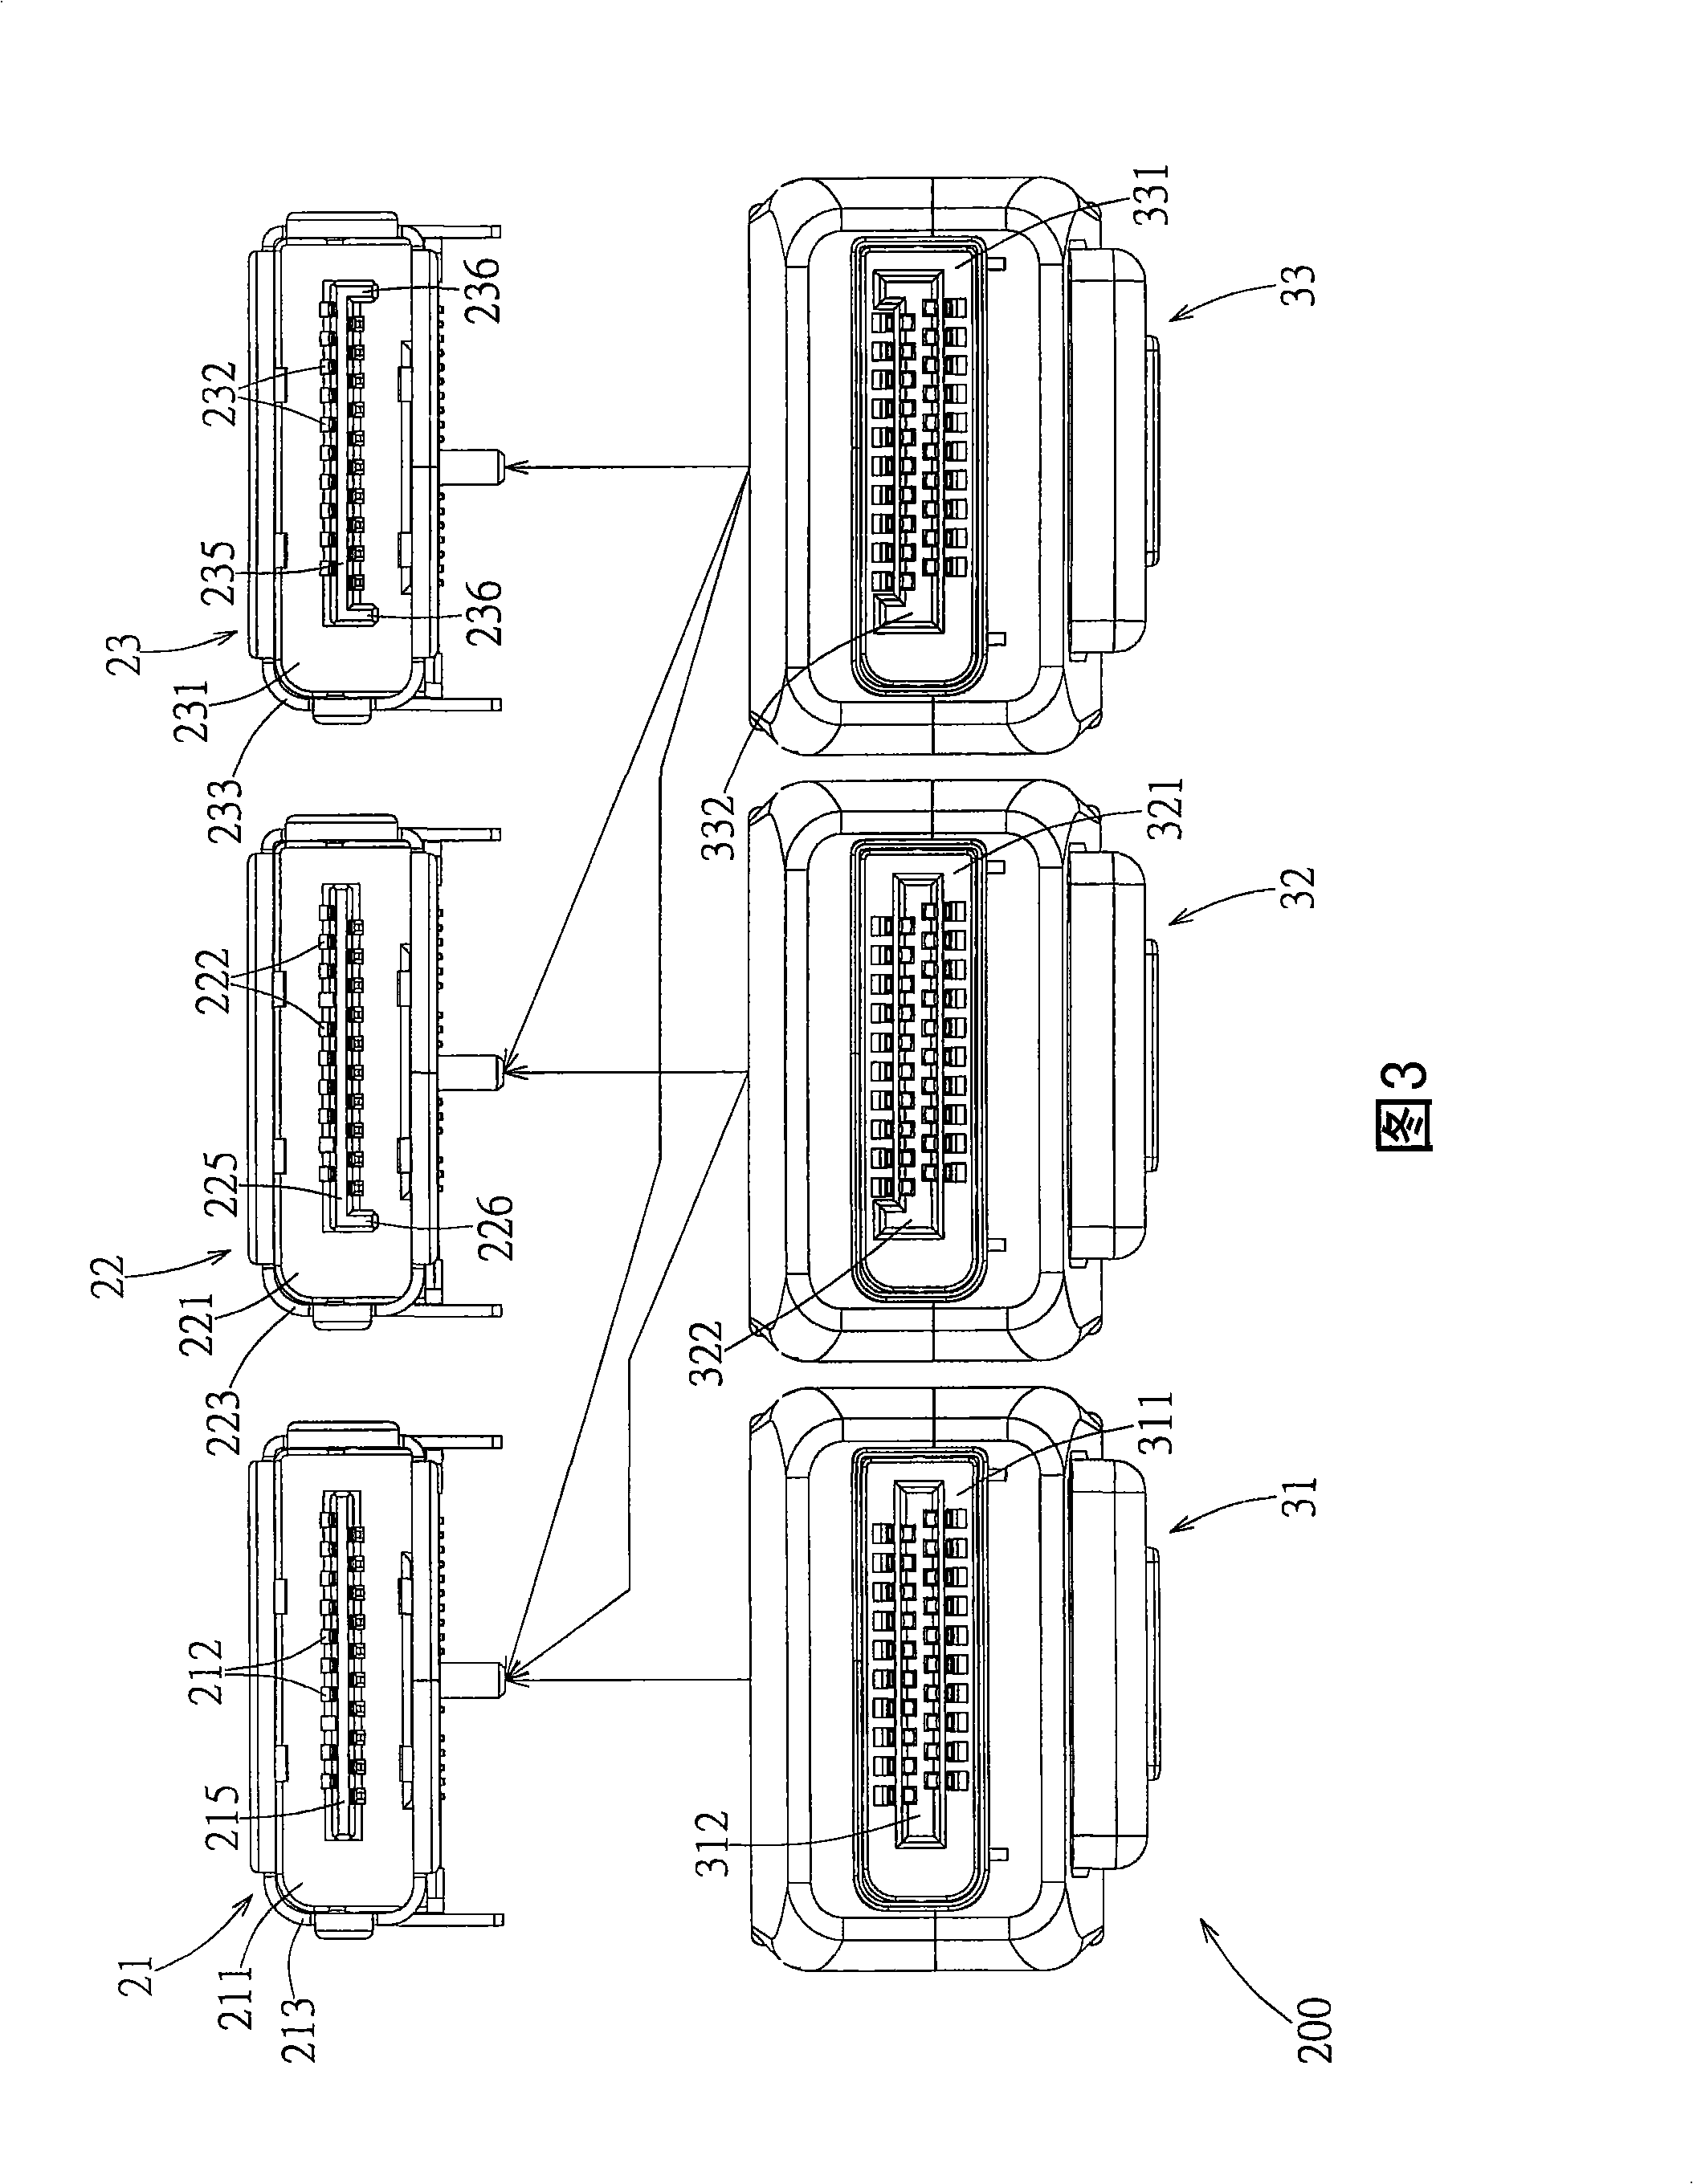 Electric connector combination system